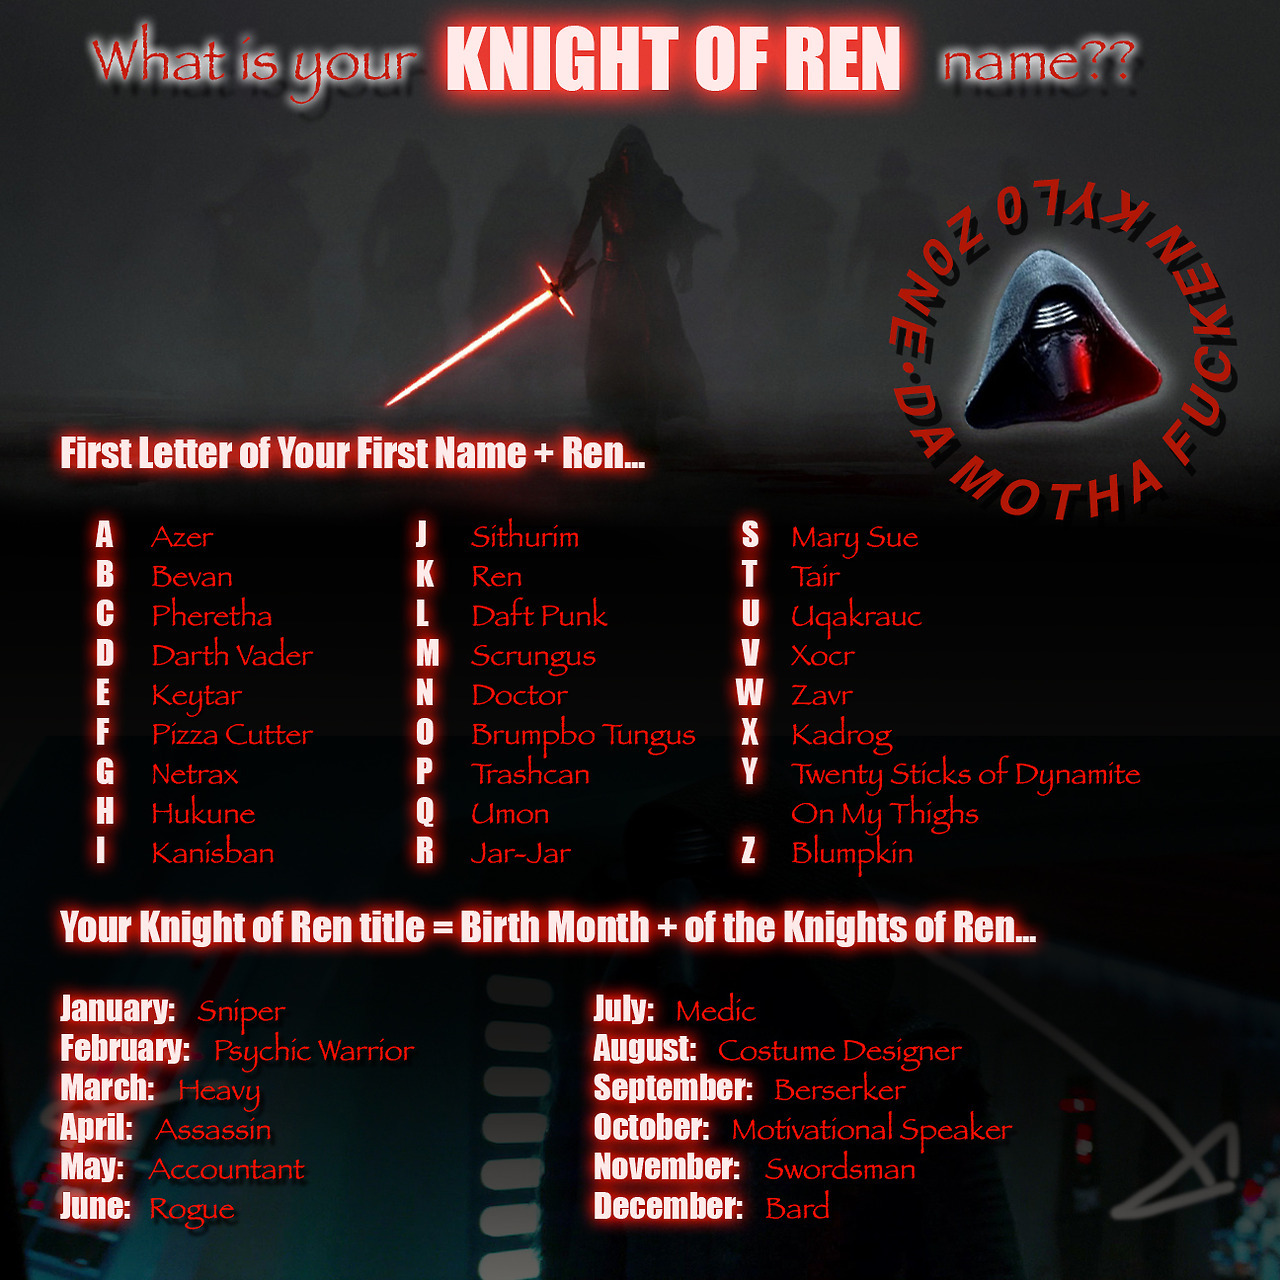 party at the end of tumblr kyloream Knights of Ren Name 